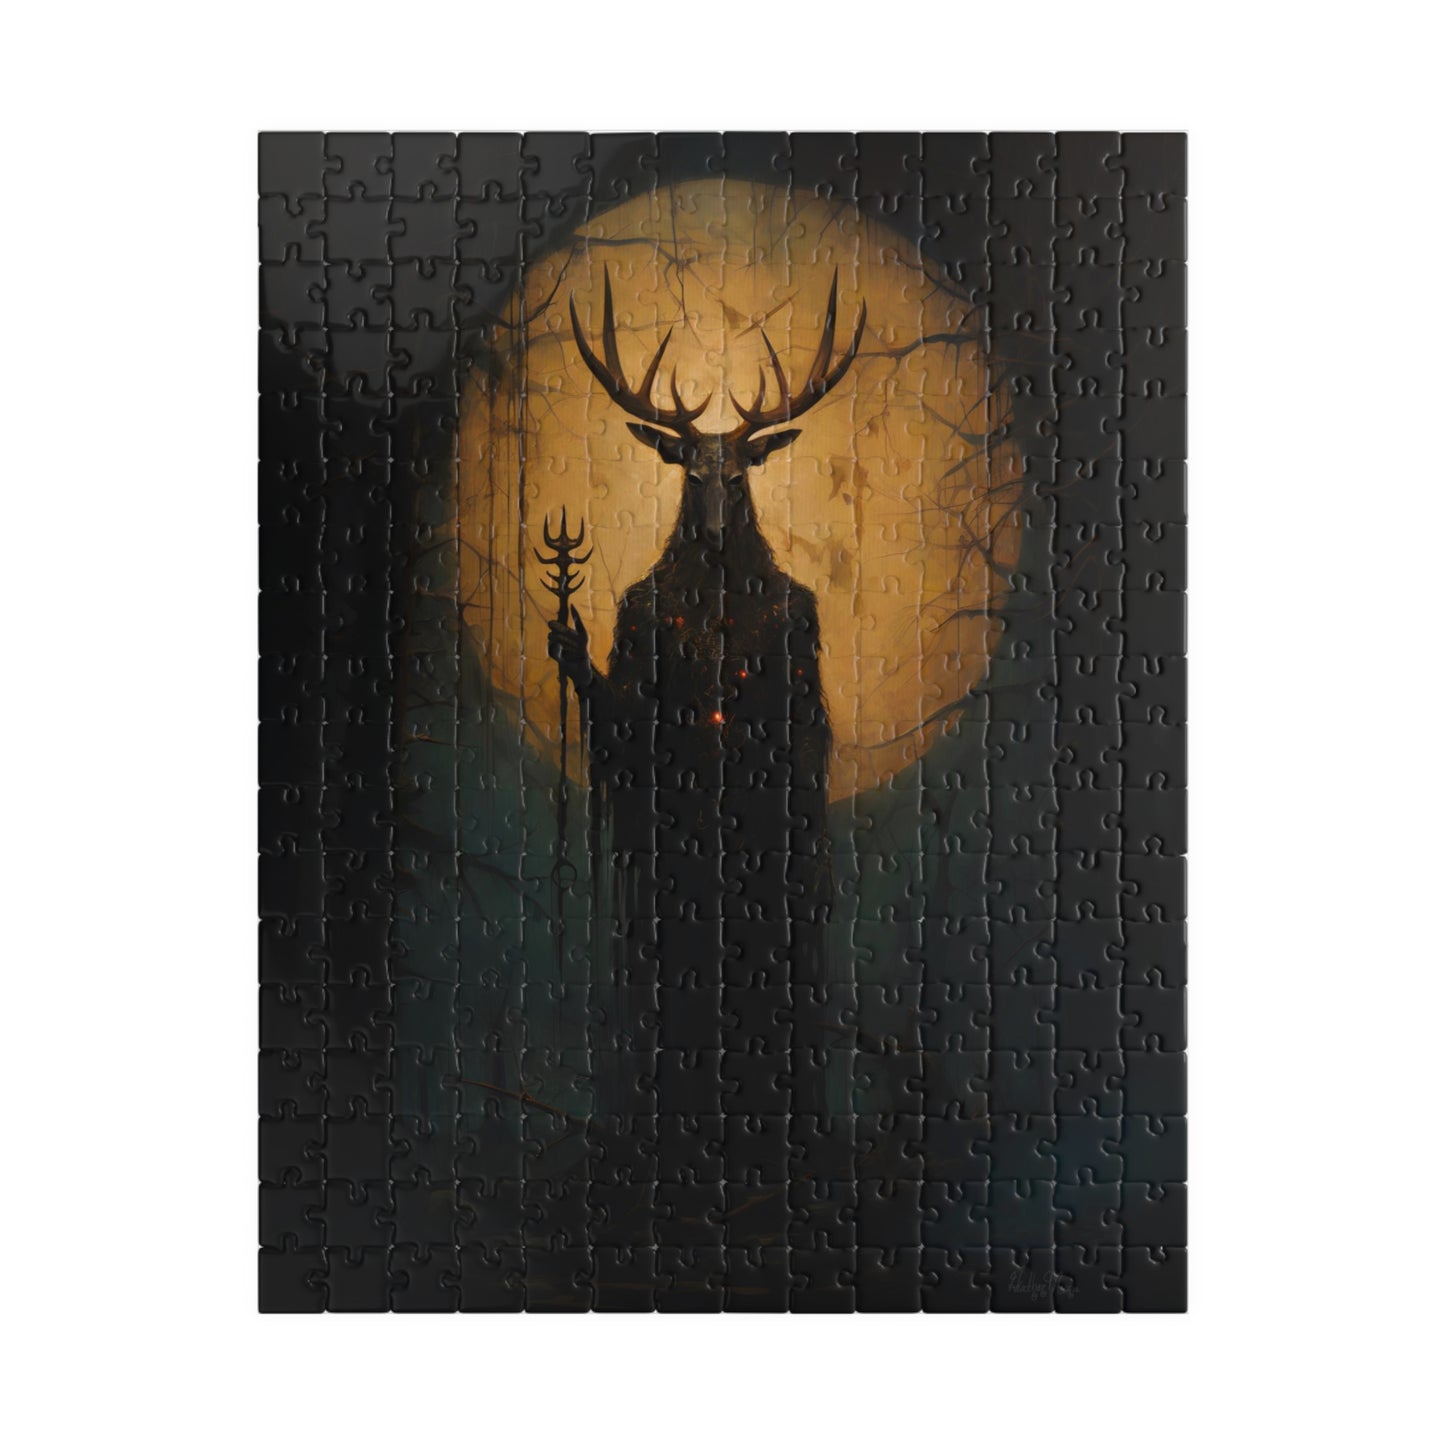 Slavic Wendigo in an Enchanted Forest | Jigsaw Puzzle